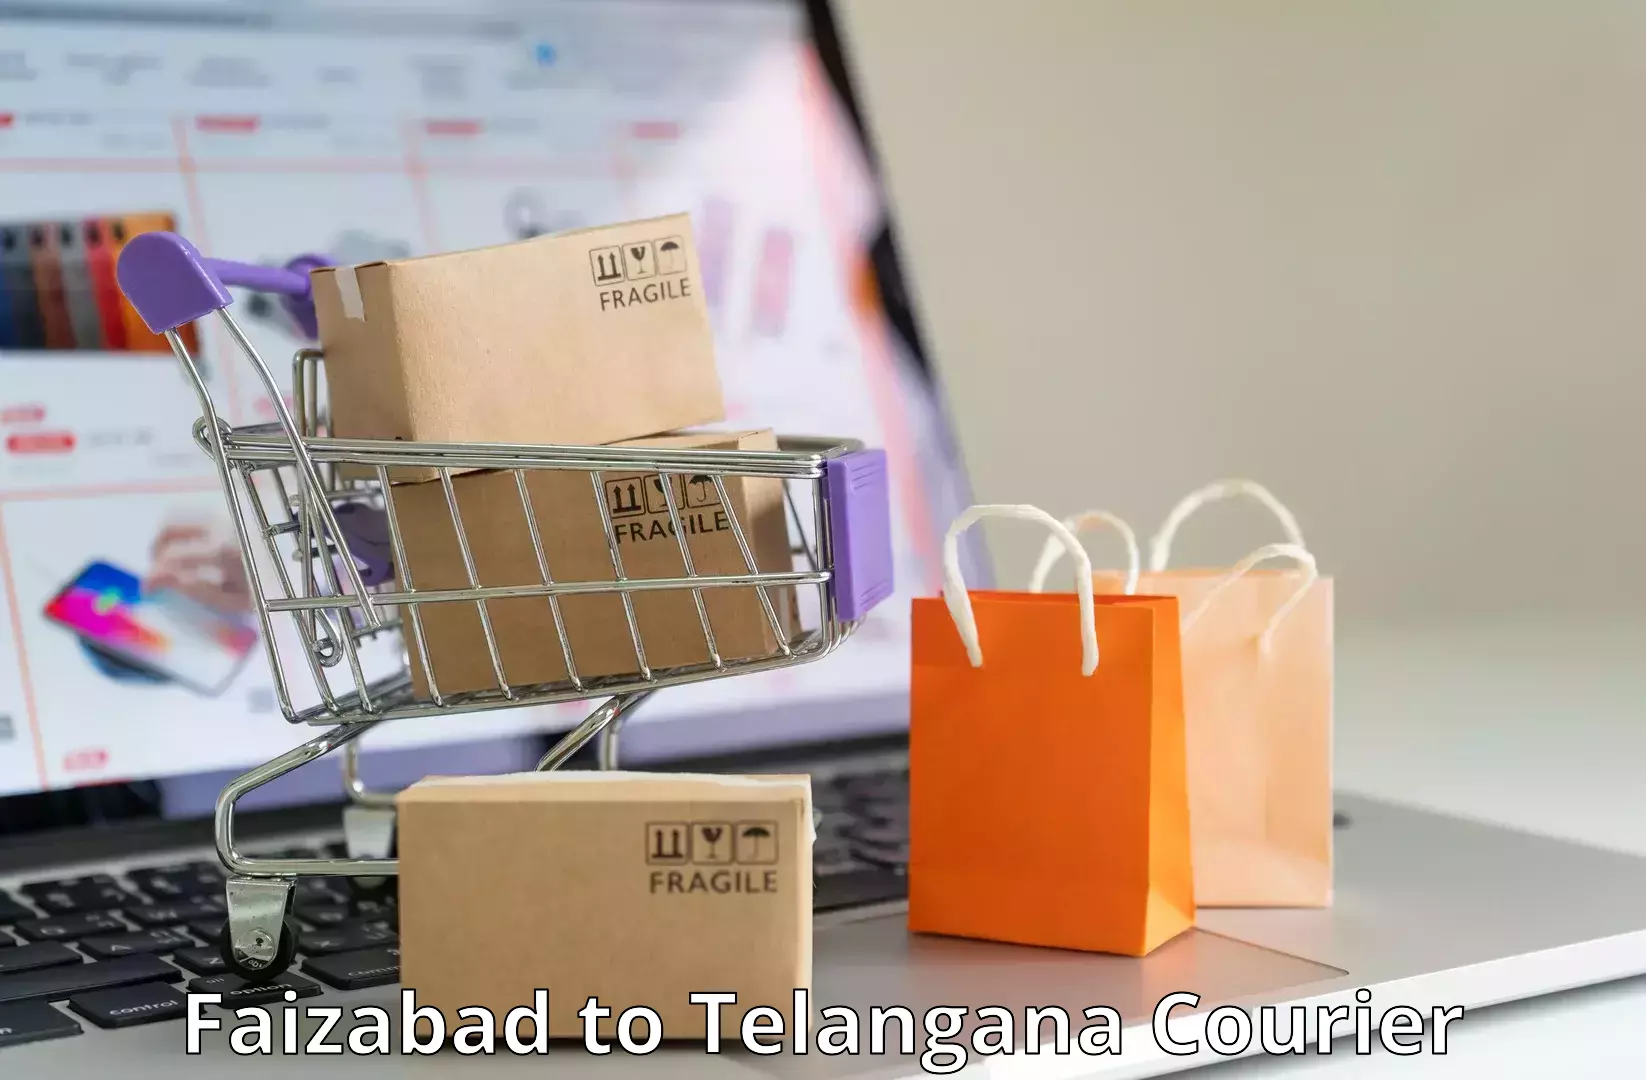 Multi-city courier Faizabad to Hyderabad